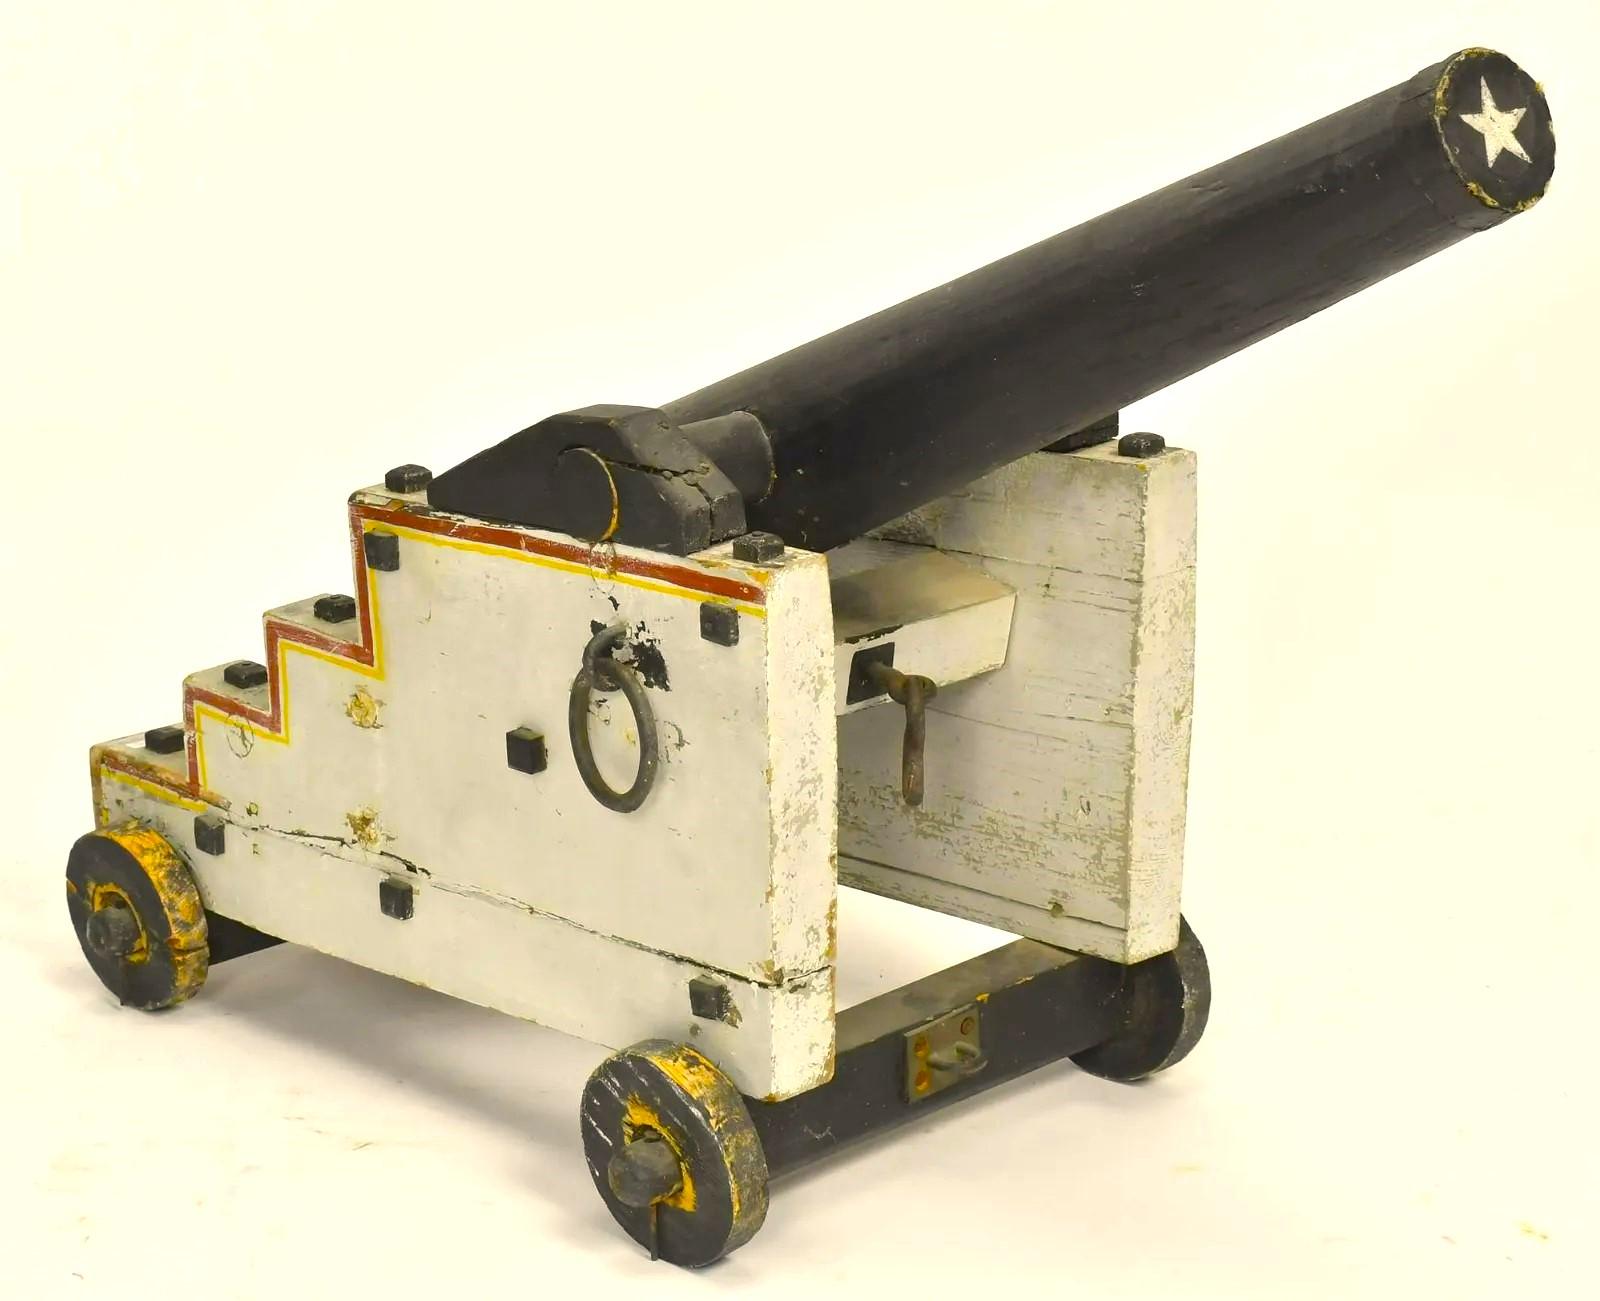 A unique folk-art naval cannon, in carved and painted wood, with rolling wood wheels and other decorative details, circa 1900.